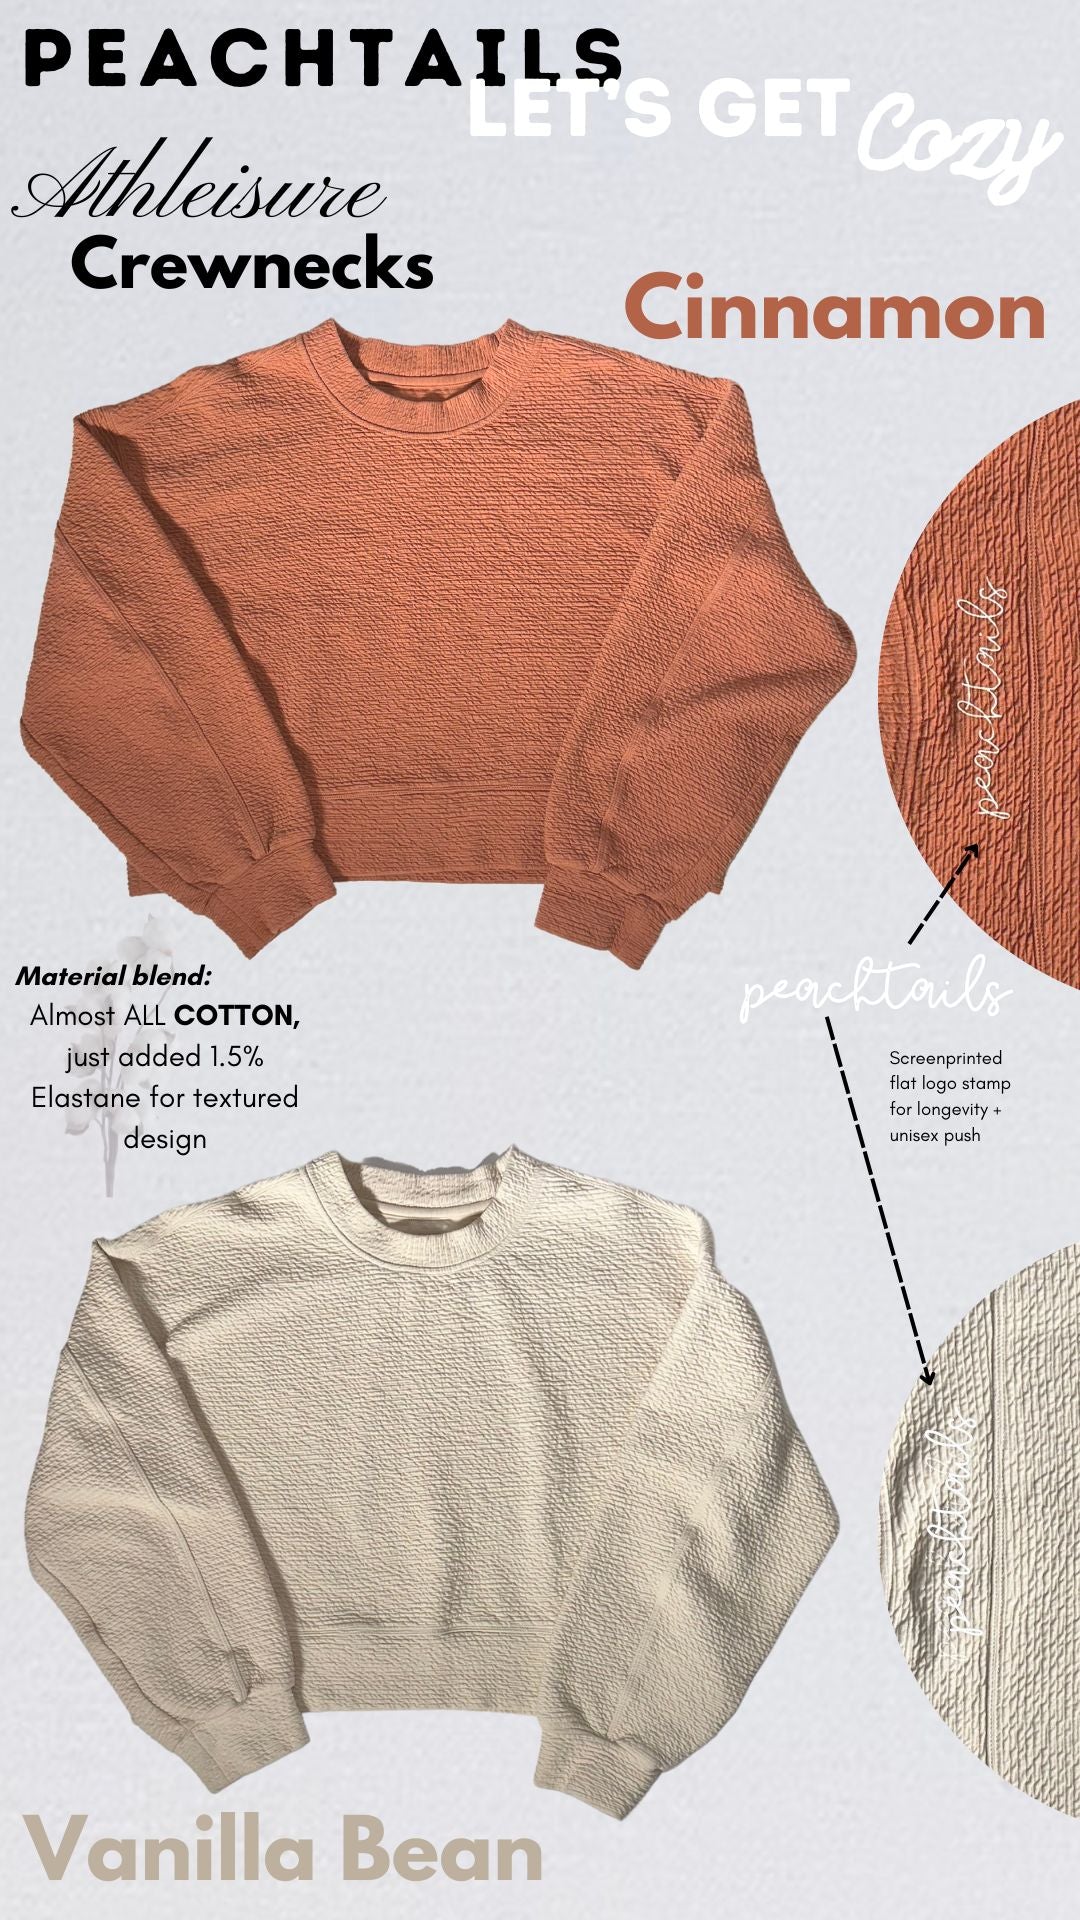 The image is an advertisement for Peachtails Athleisure Crewnecks in "Cinnamon" and "Vanilla Bean" colors. It features images of two crewneck sweaters, one in a cinnamon color, the other in vanilla. Details include a material blend of mostly cotton with a touch of elastane for a textured design, and segmented ribbing for lasting retention and unique puff sleeves. The Peachtails logo is also shown.